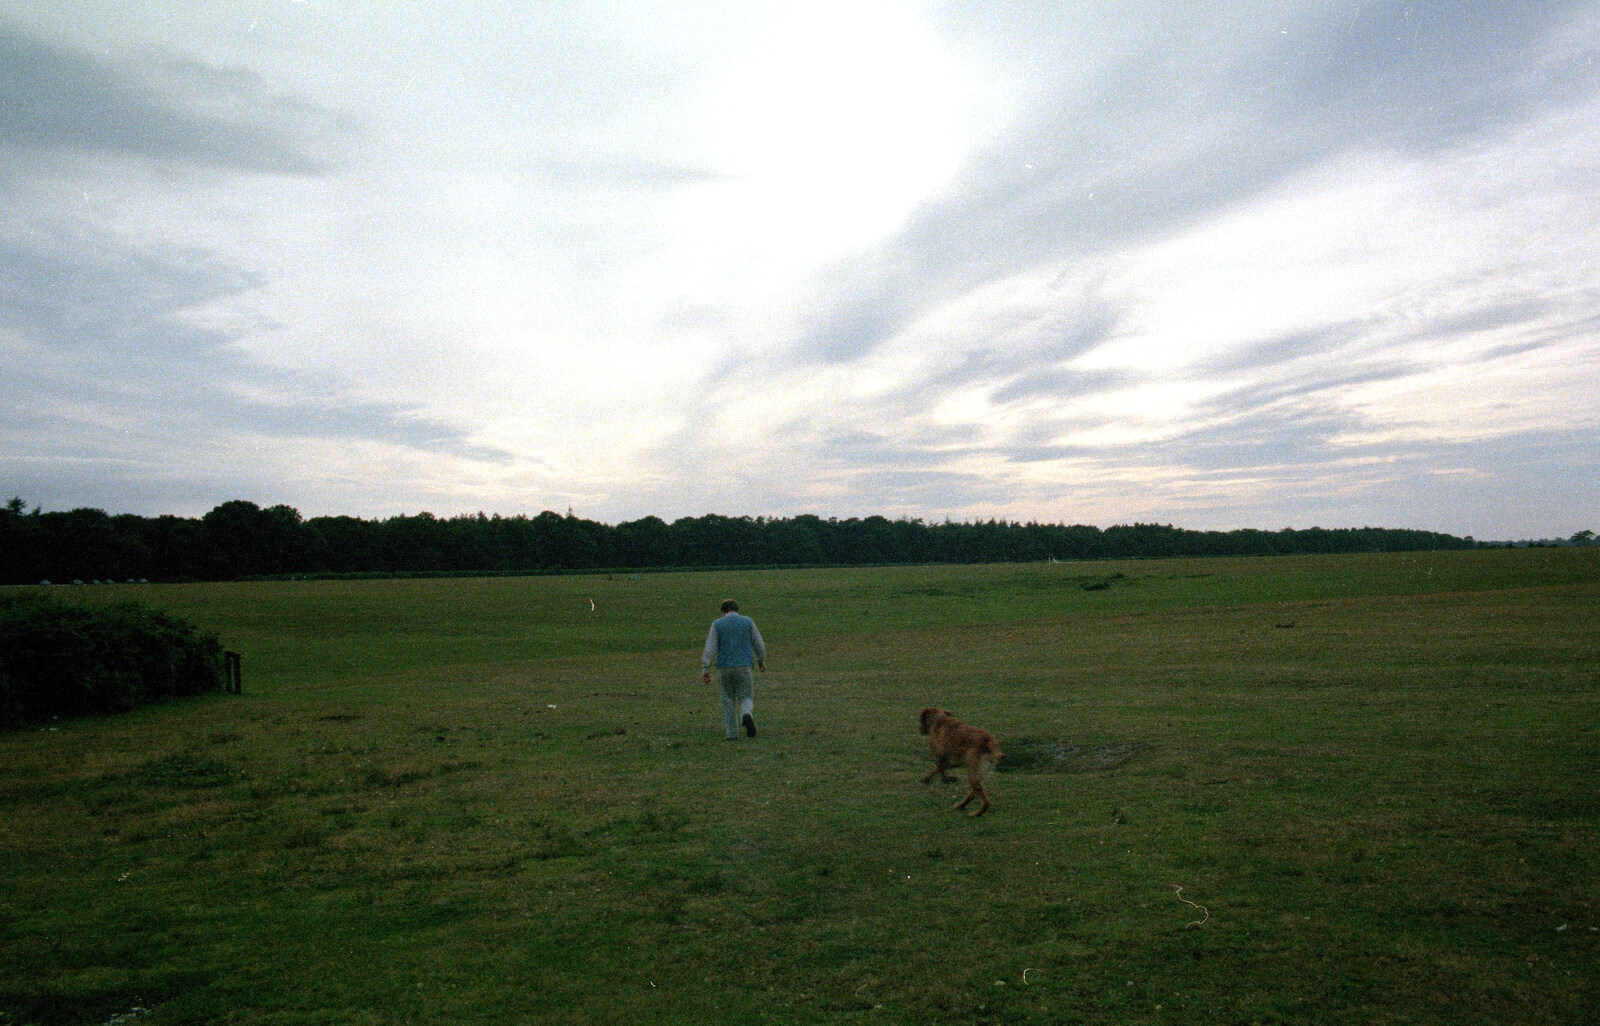 Hamish and Geordie on Wilverley Plain from A Vineyard Miscellany, Bransgore and the New Forest - 18th July 1986